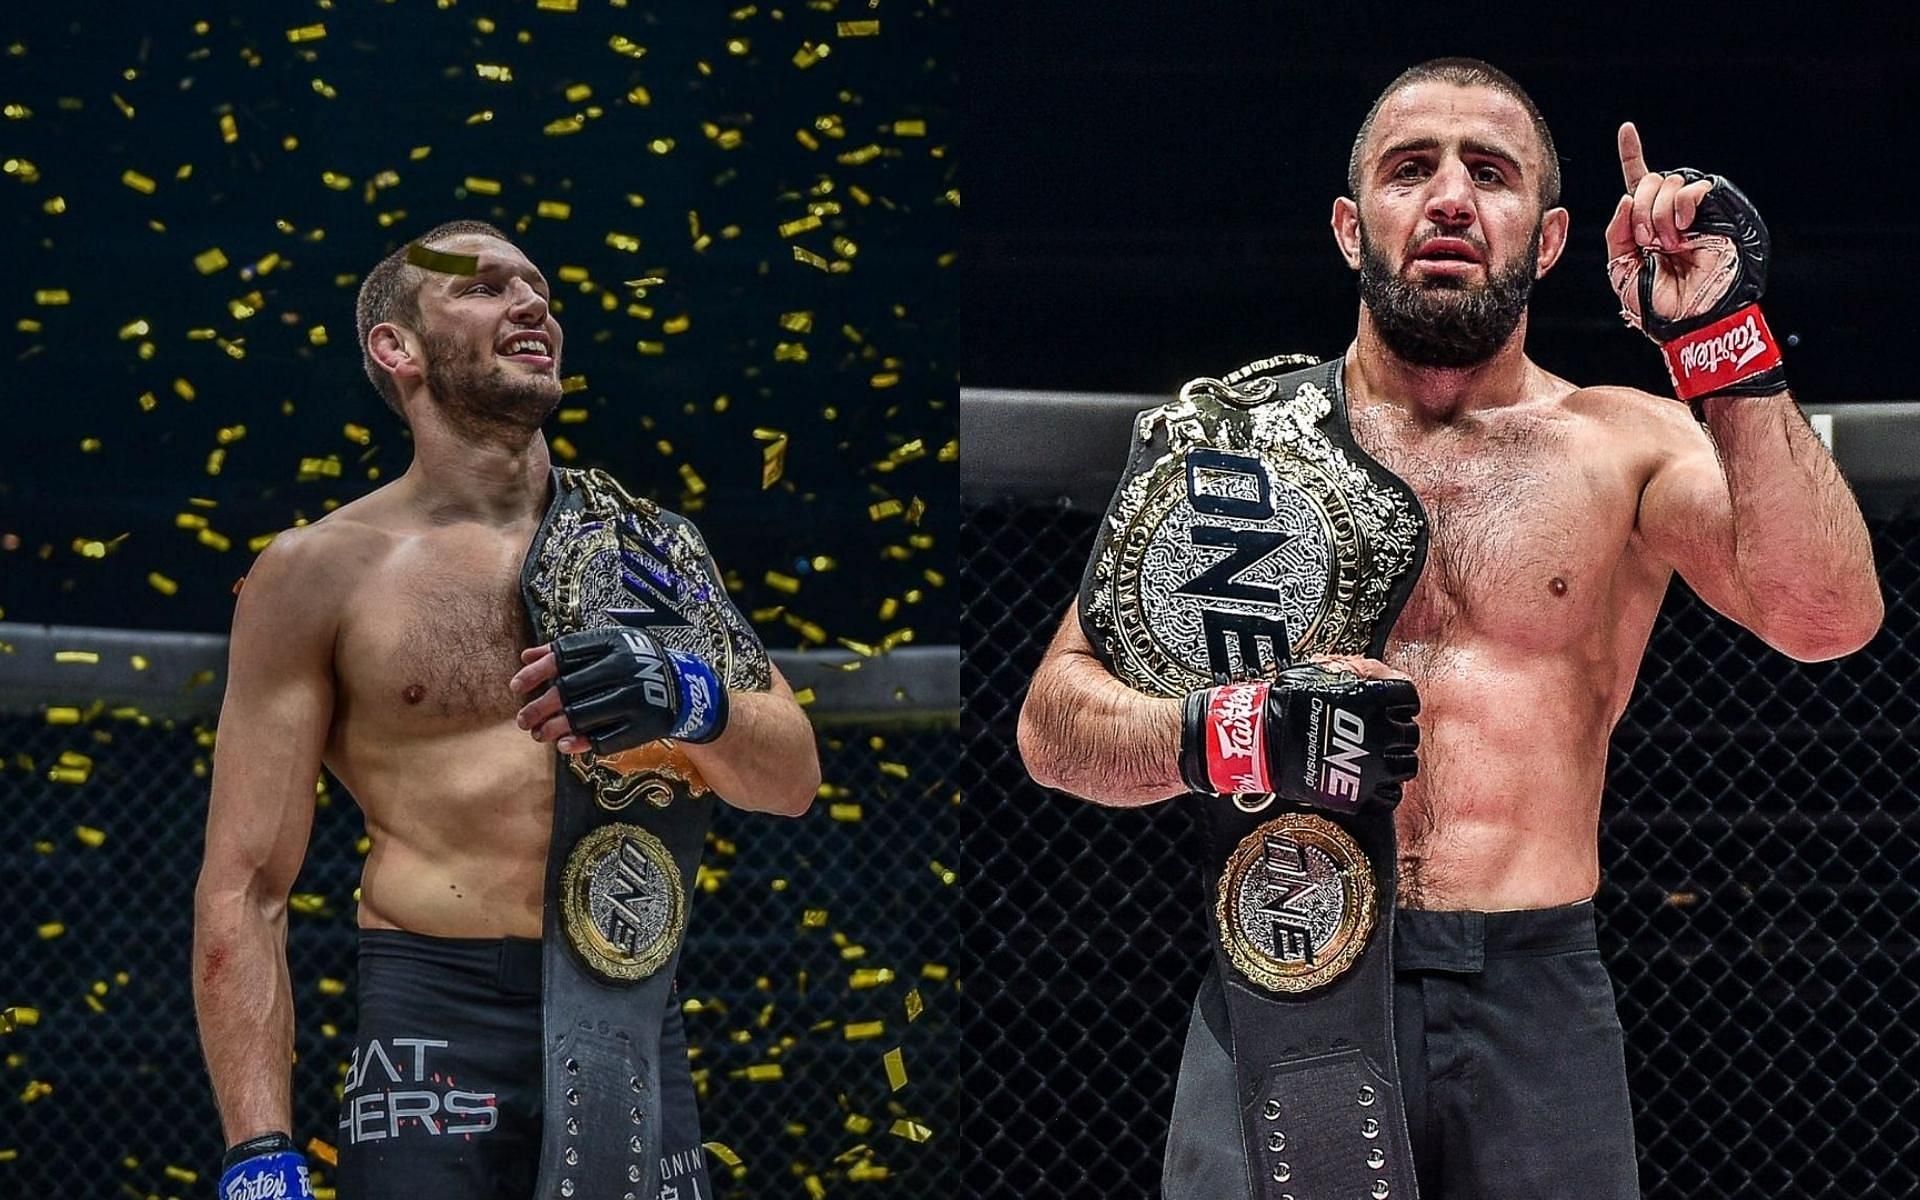 A tale of two kings. The superfight between Reinier de Ridder (left) and Kiamrian Abbasov (right) takes place in the main event of ONE: Full Circle. (Images courtesy of ONE Championship)